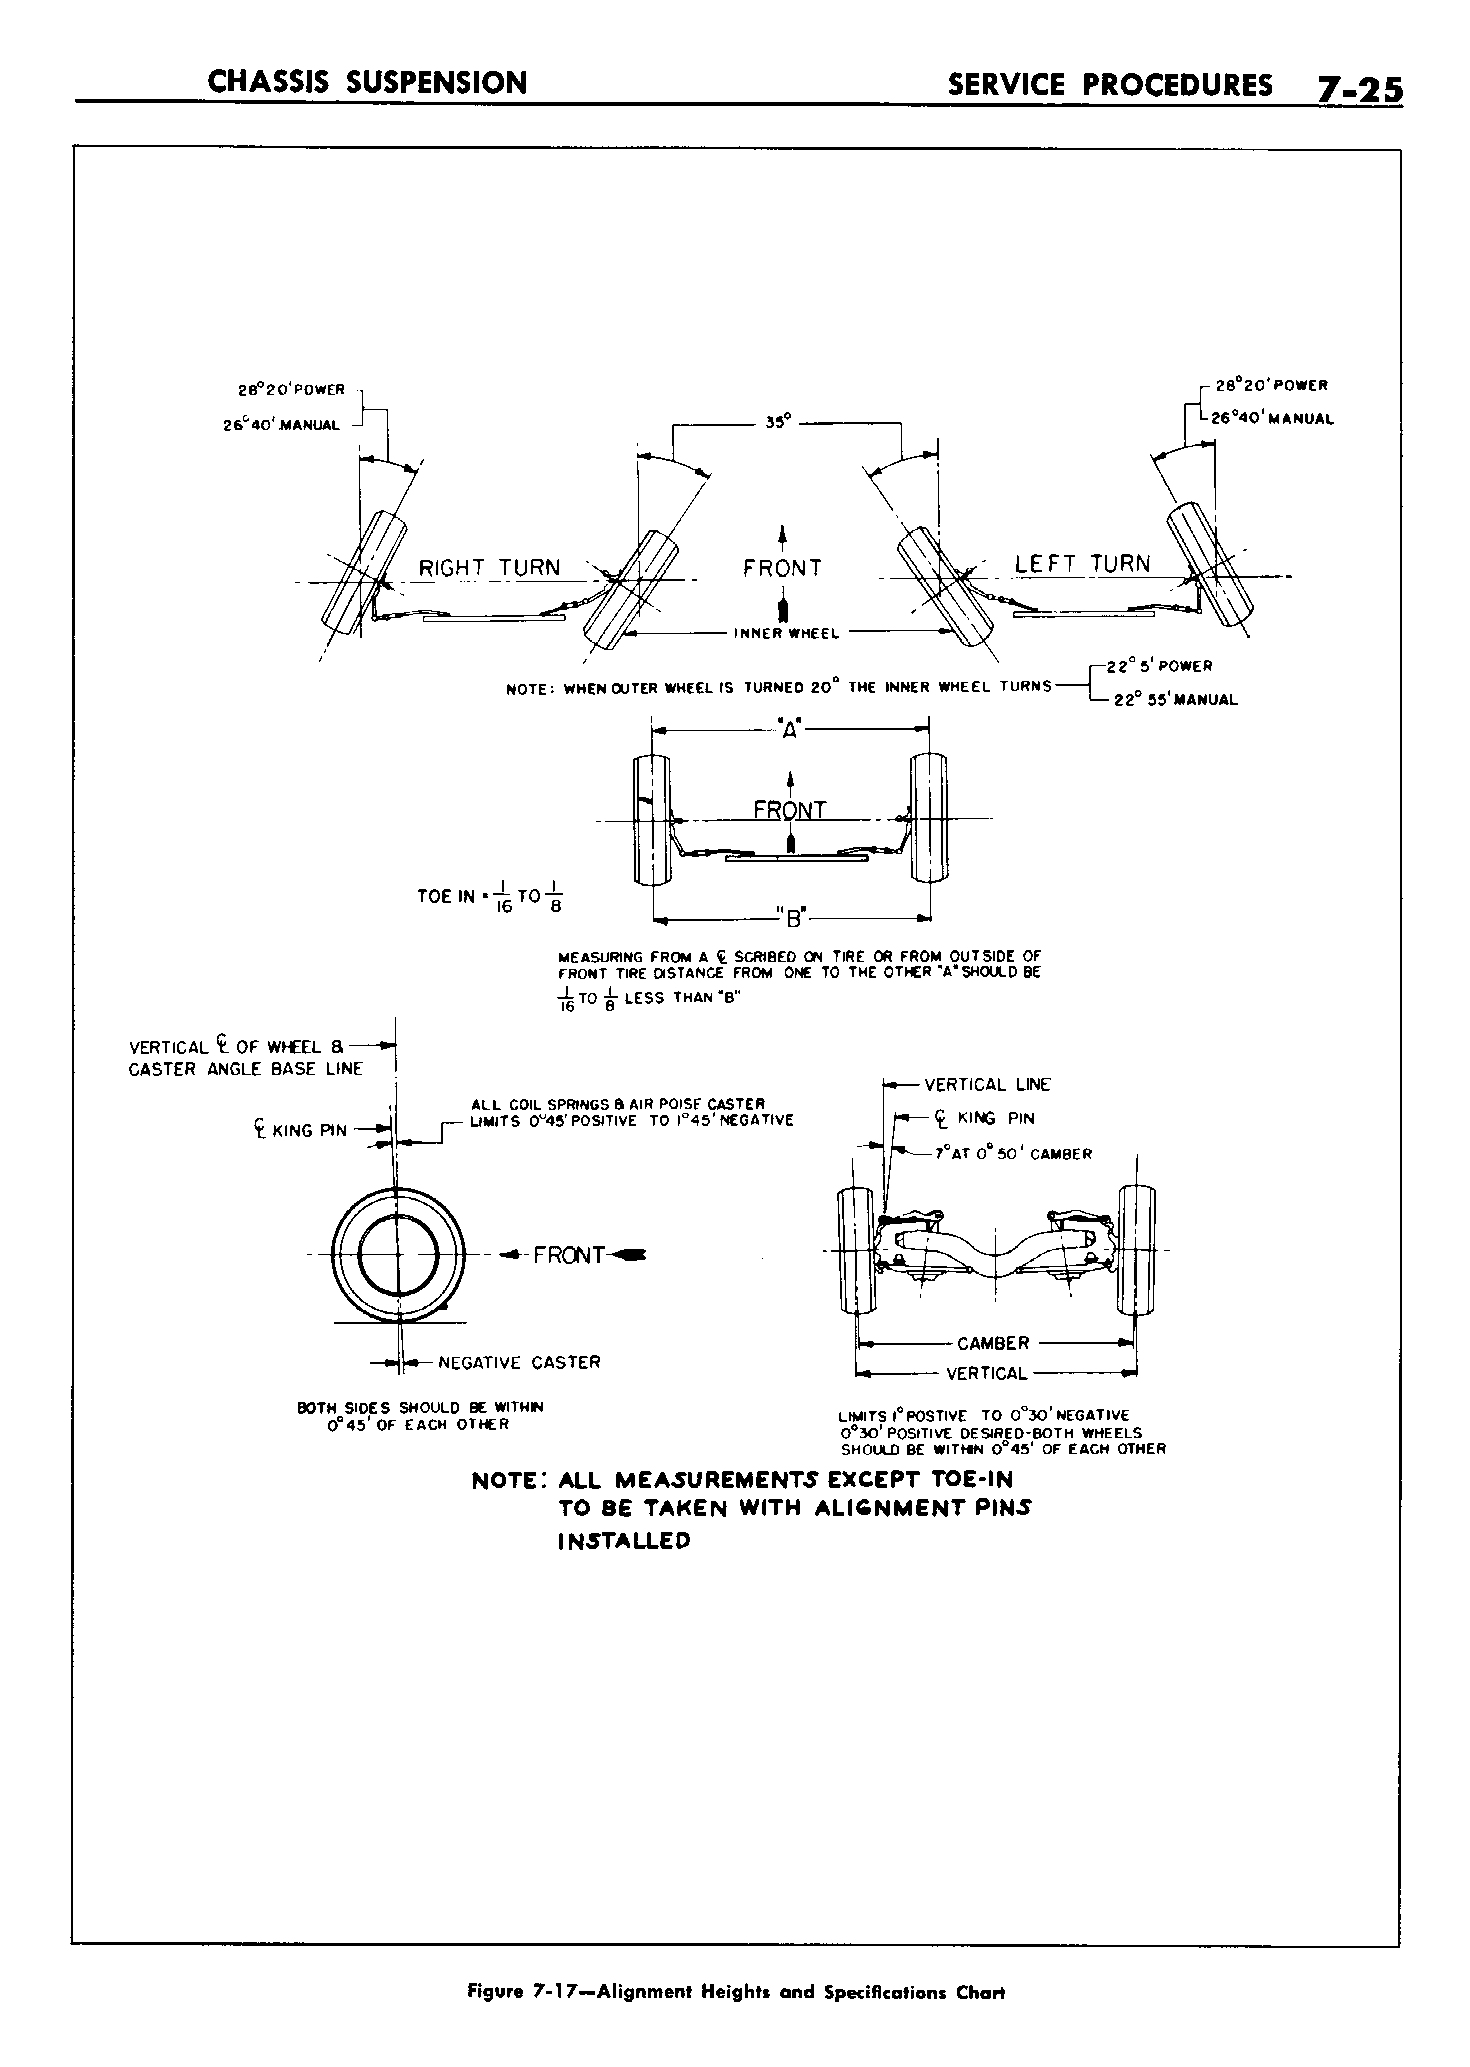 n_08 1958 Buick Shop Manual - Chassis Suspension_25.jpg